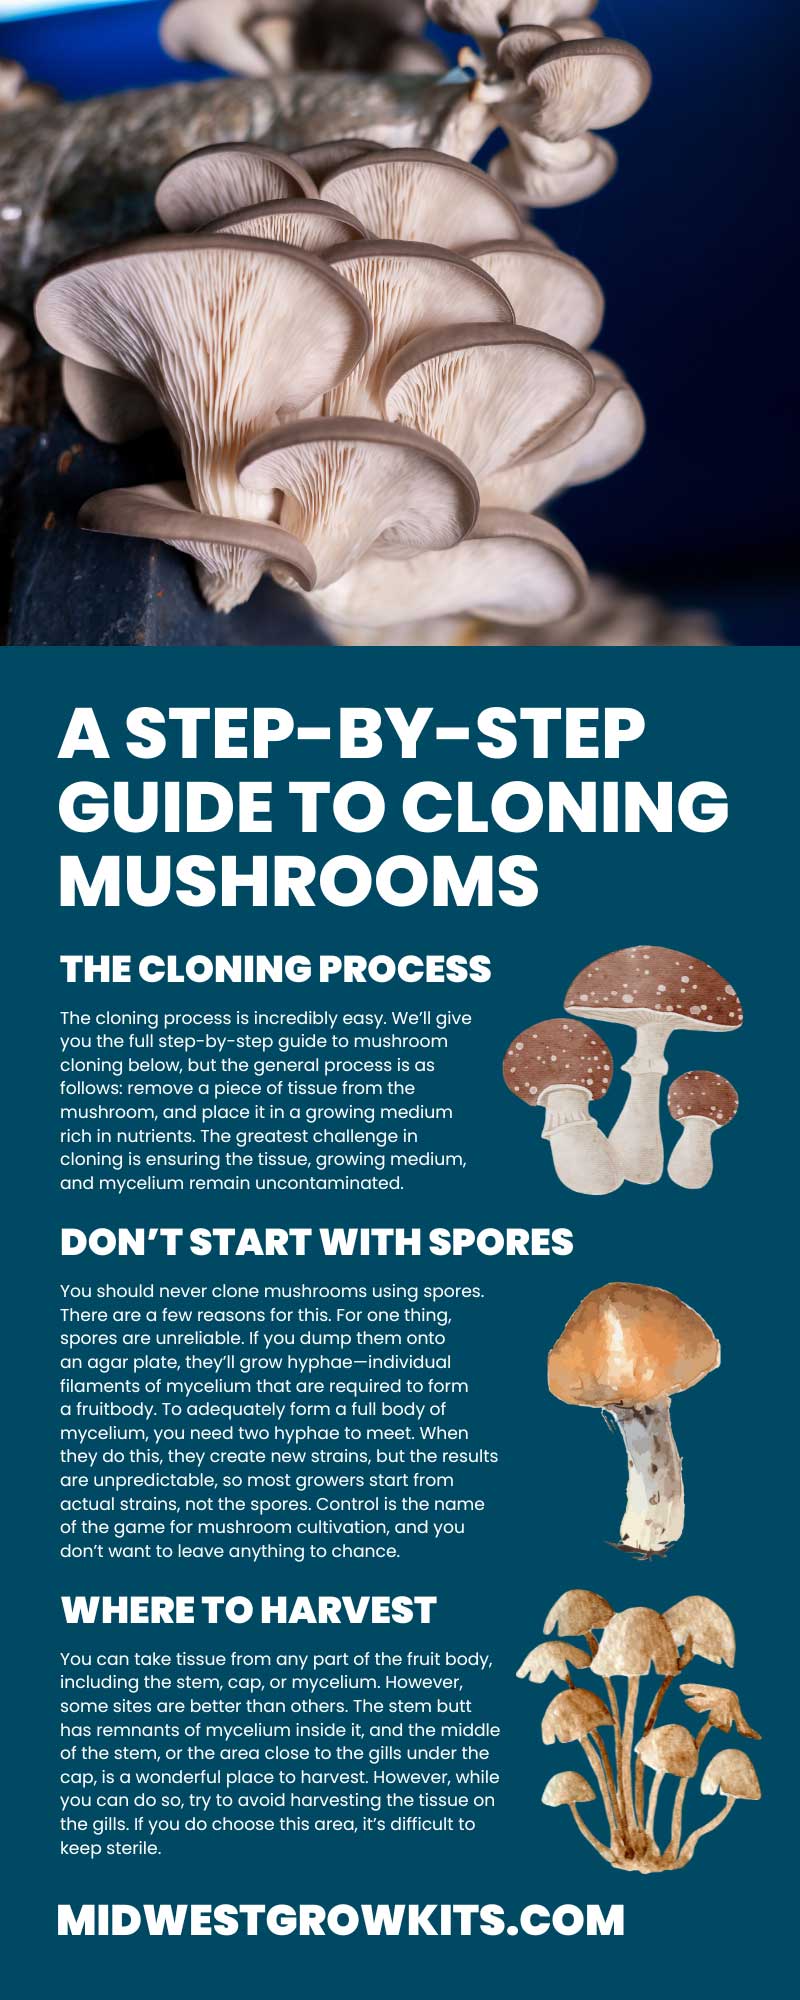 A Step-by-Step Guide to Cloning Mushrooms